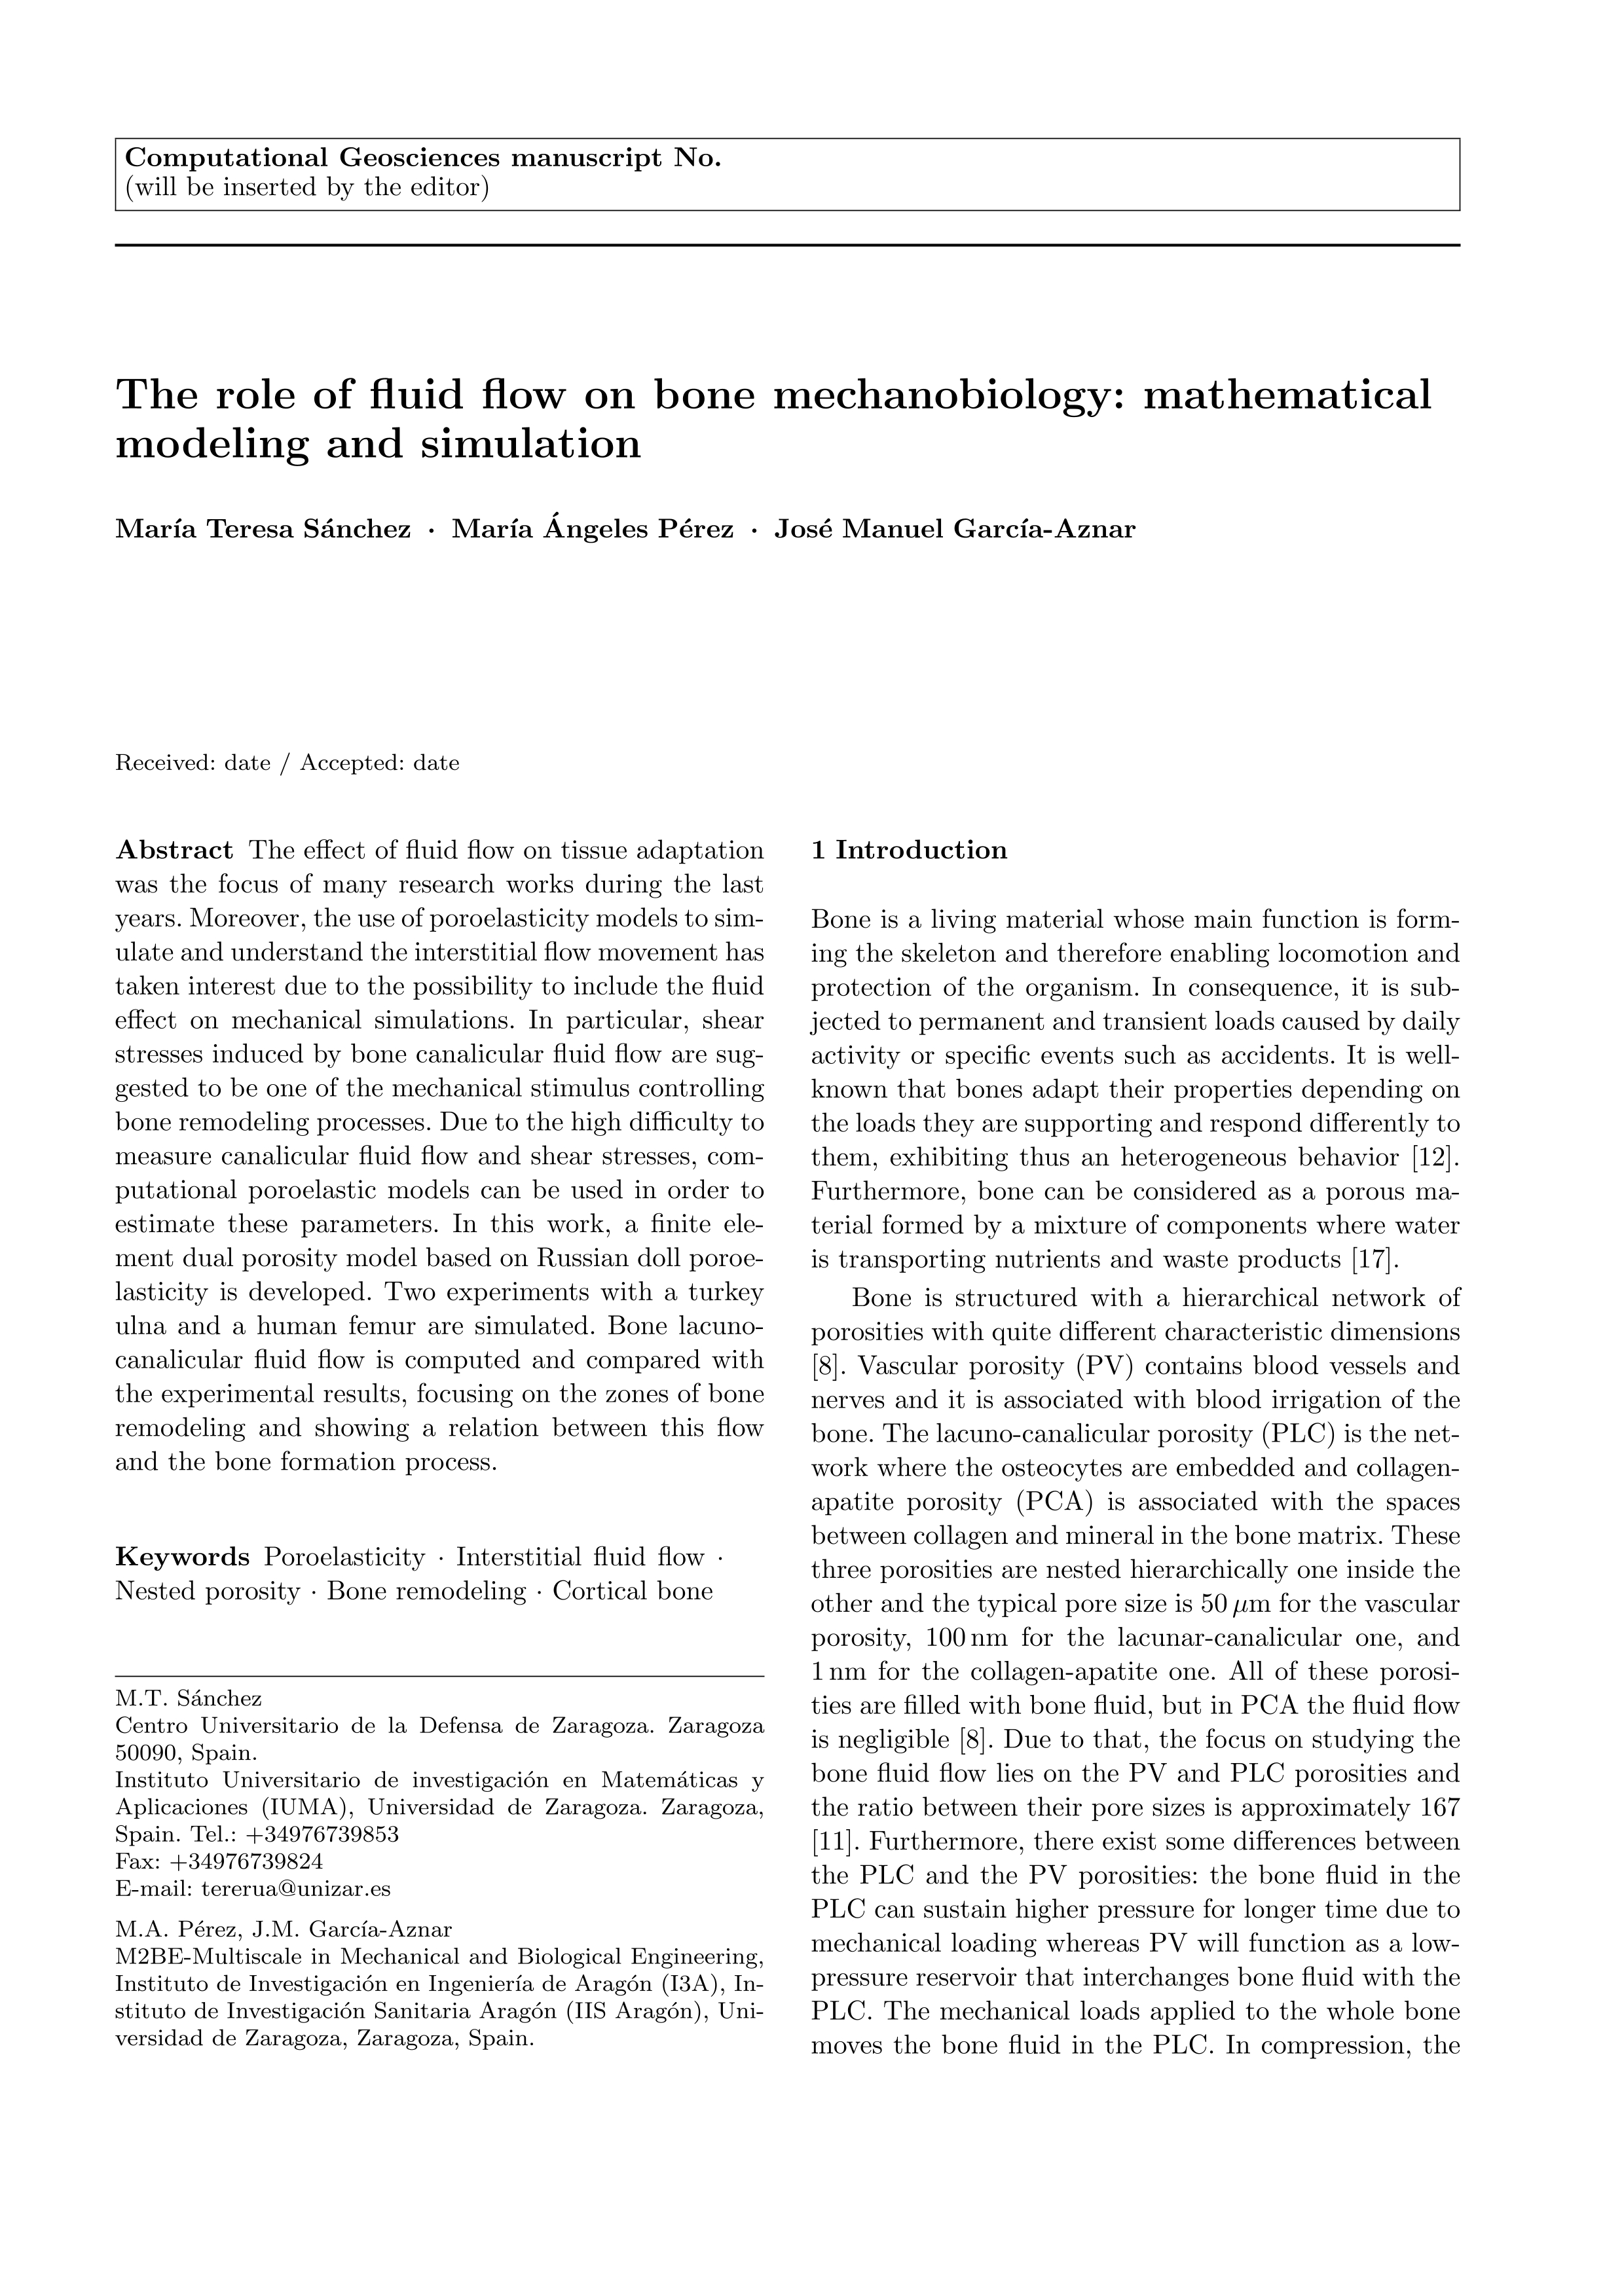 The role of fluid flow on bone mechanobiology: mathematical modeling and simulation